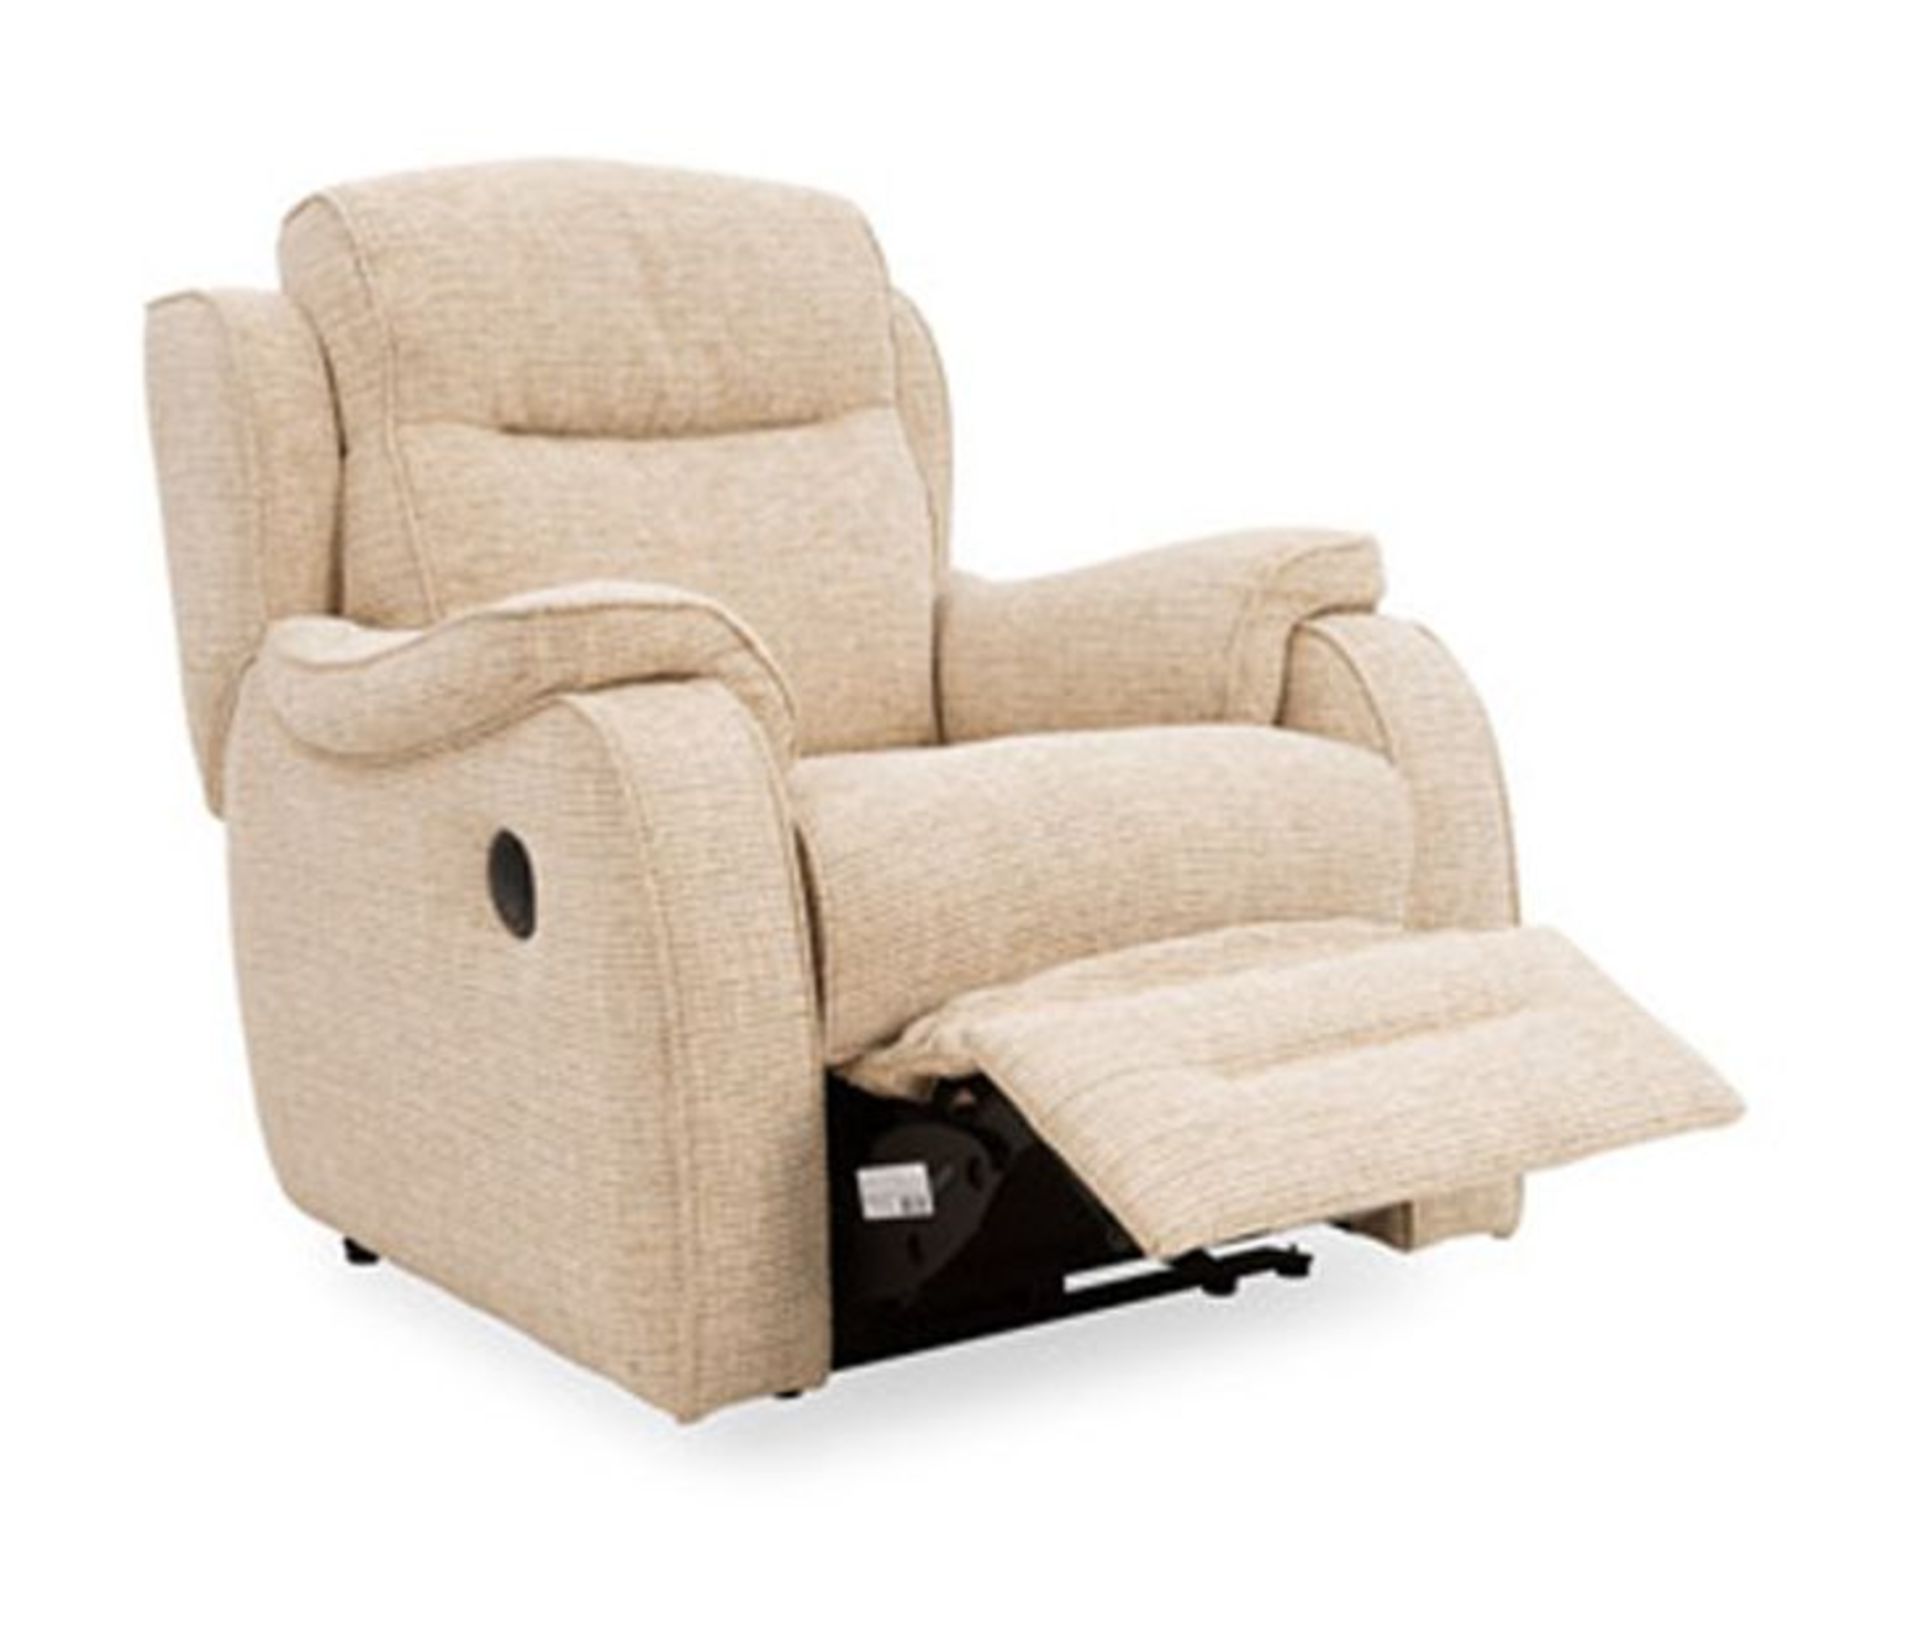 BERKLEY RISE AND RECLINER ELECTRIC CHAIR